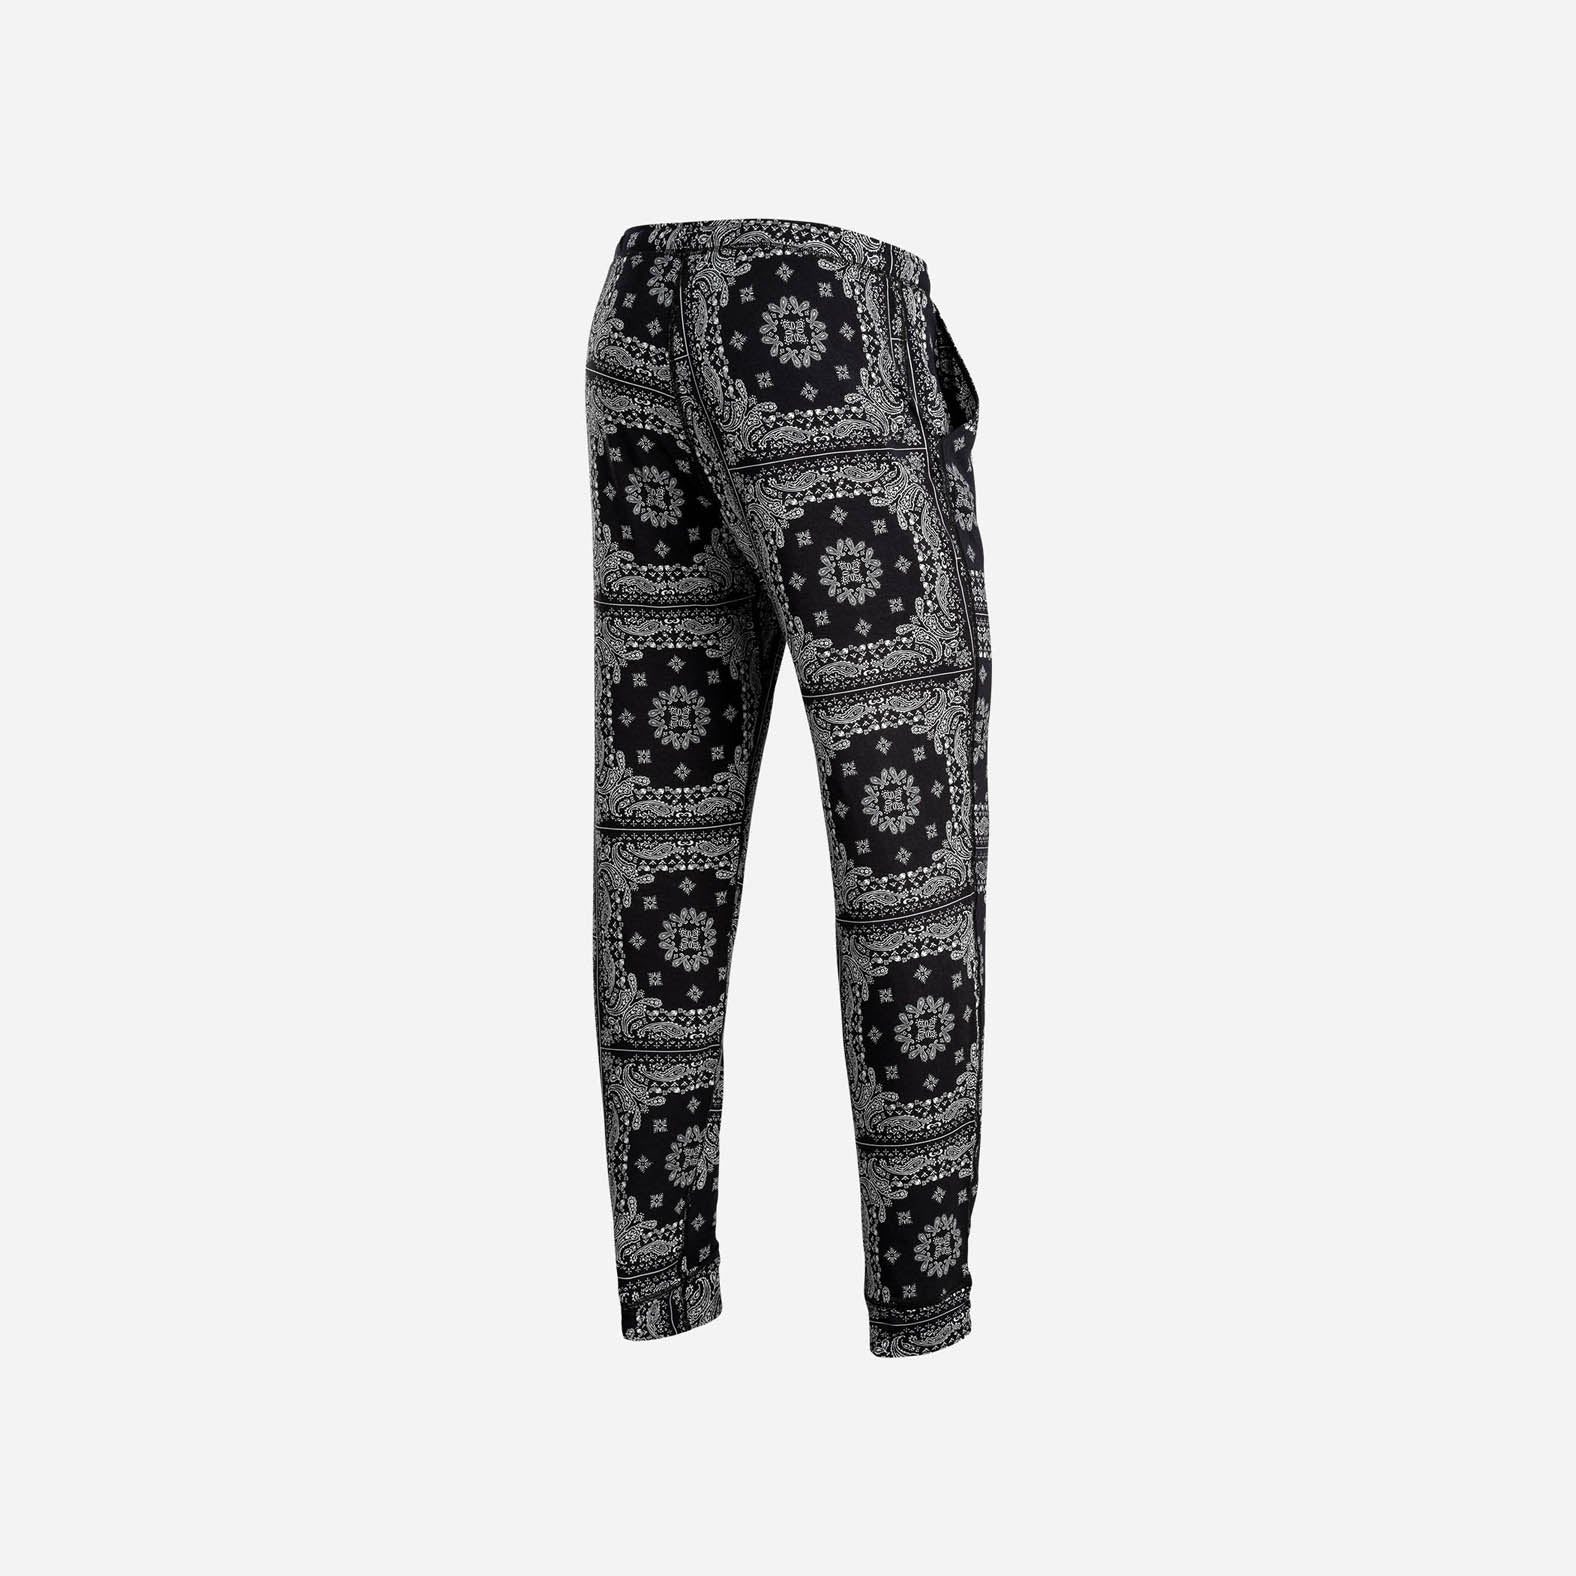 Comfy Luxe Camo Print Lightweight Lounge Pants - Size L/XL: US